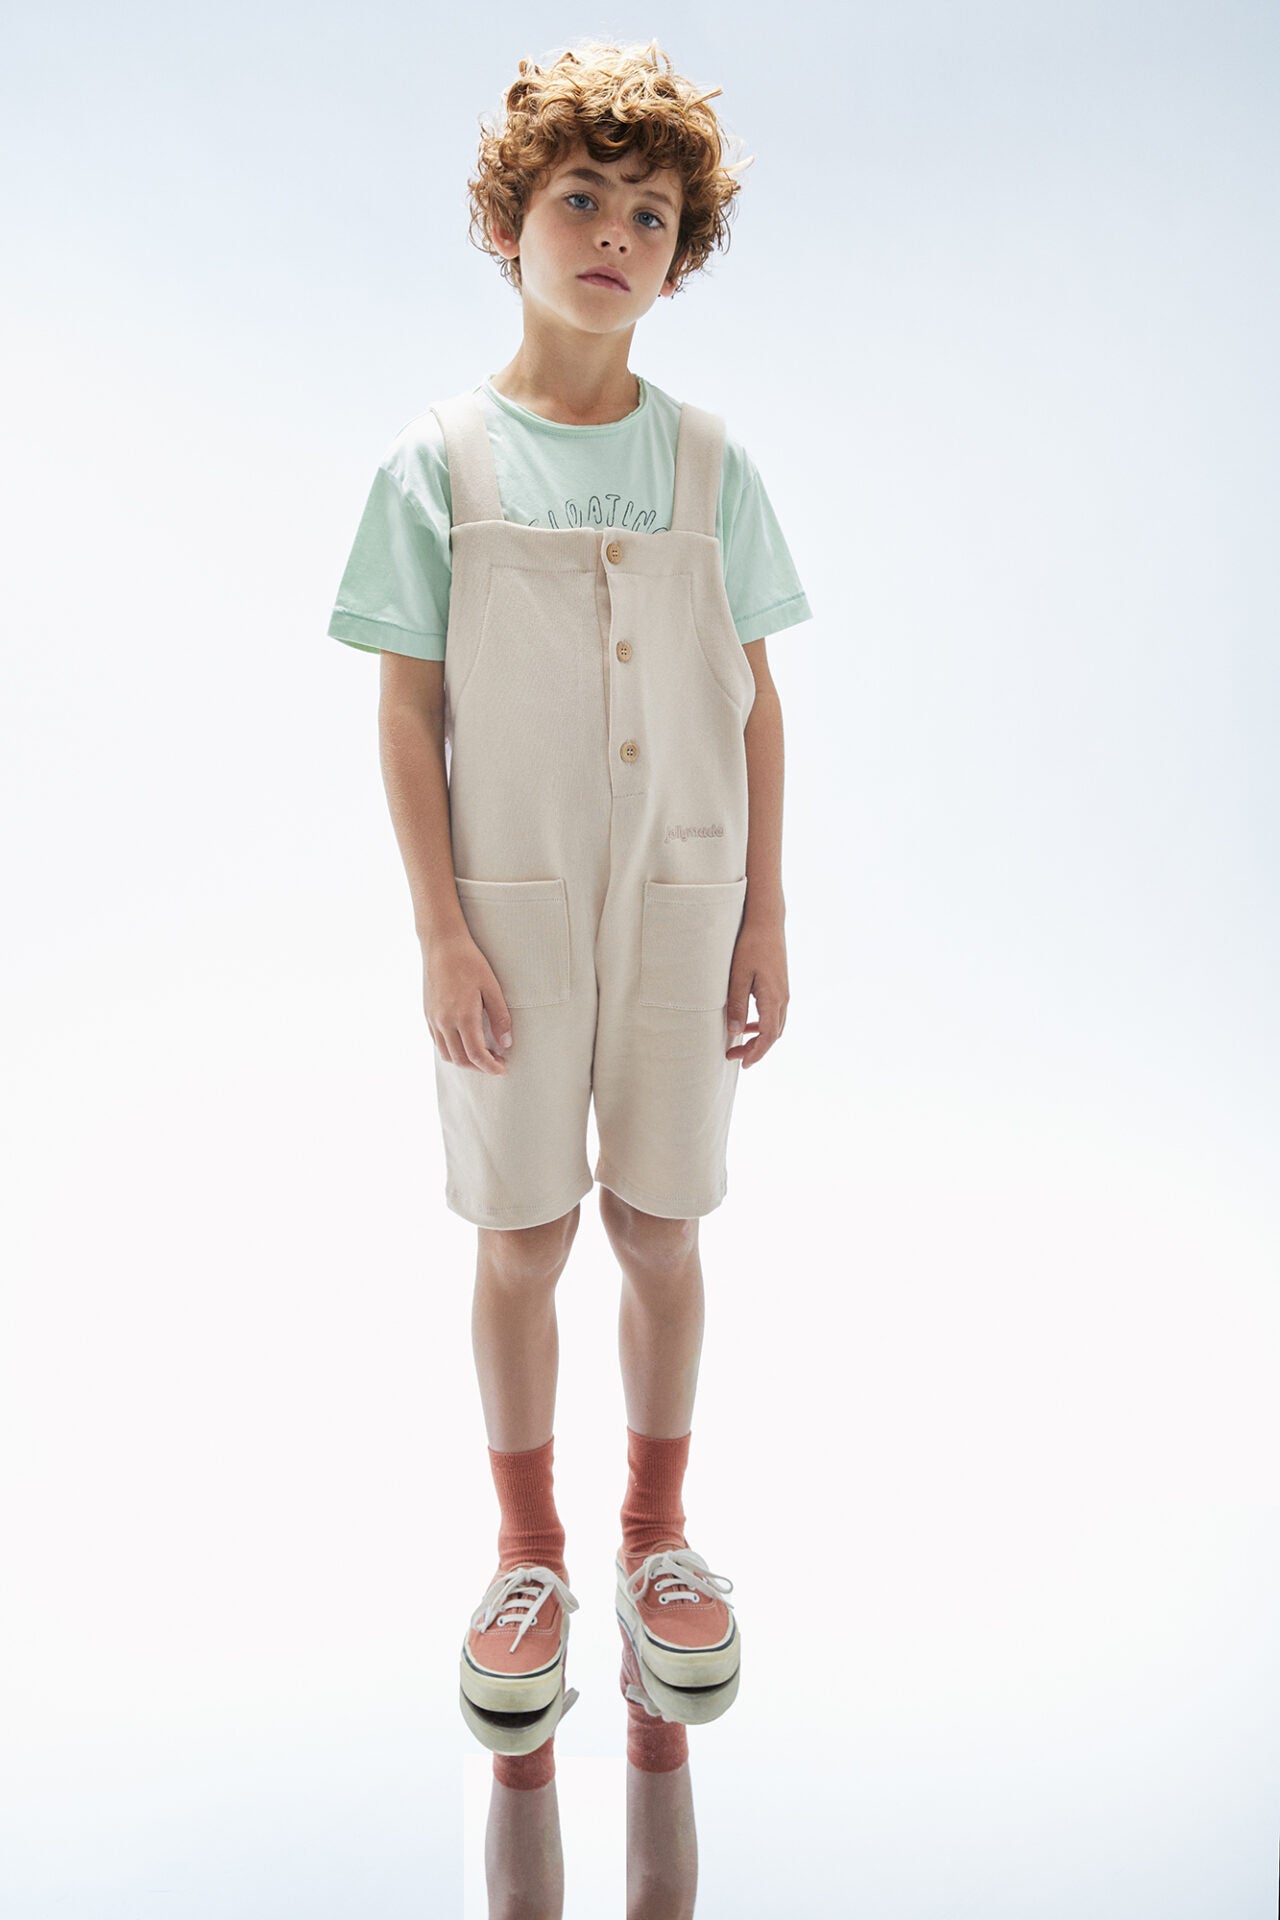 Tide Overall Beige Jumpsuits Jellymade 